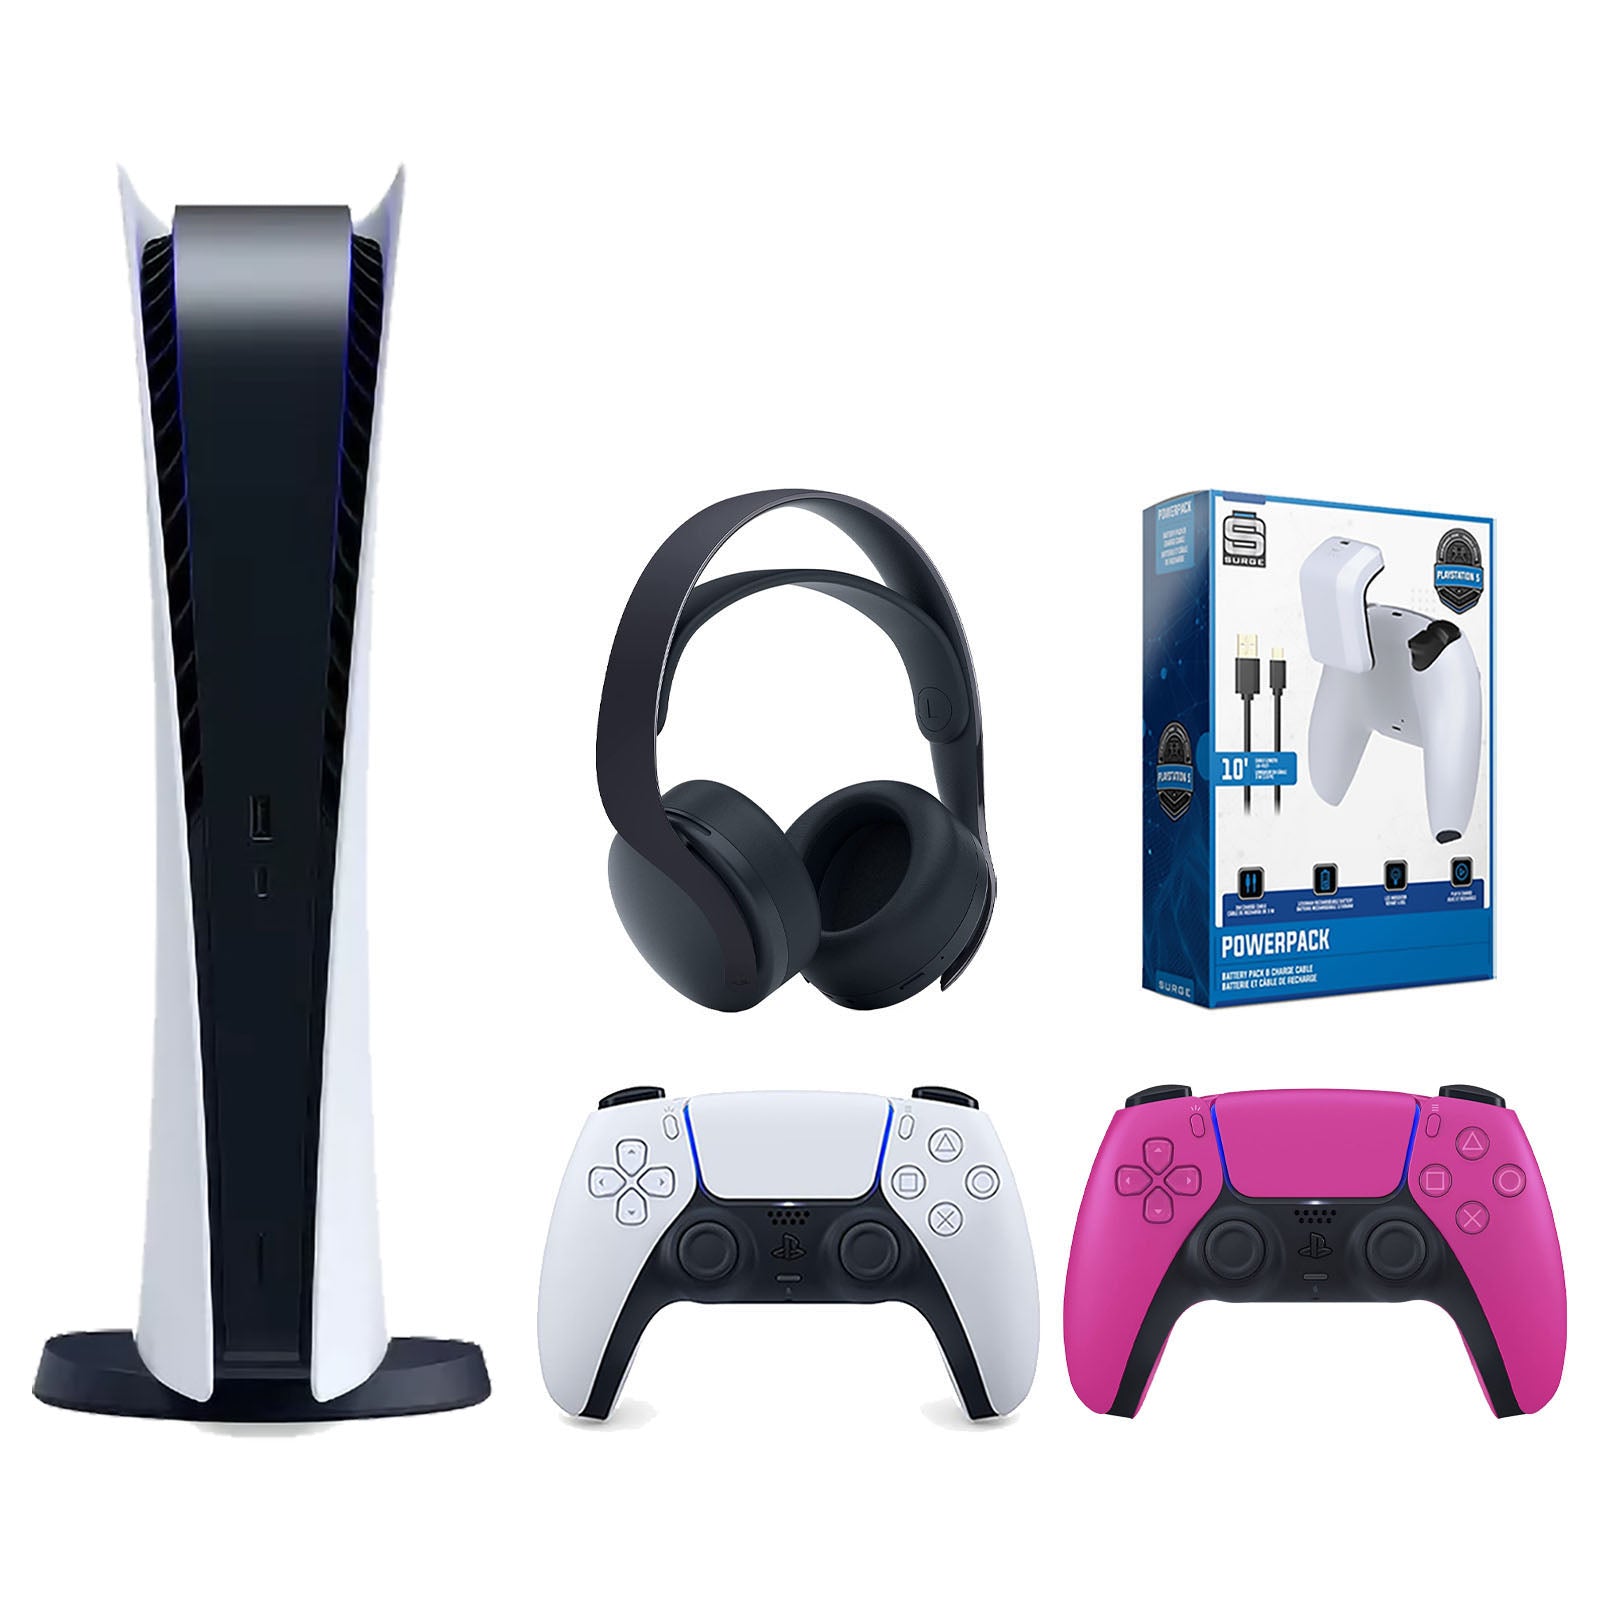 Sony Playstation 5 Digital Edition Console with Extra Pink Controller, Black PULSE 3D Headset and Surge PowerPack Battery Pack & Charge Cable Bundle - Pro-Distributing